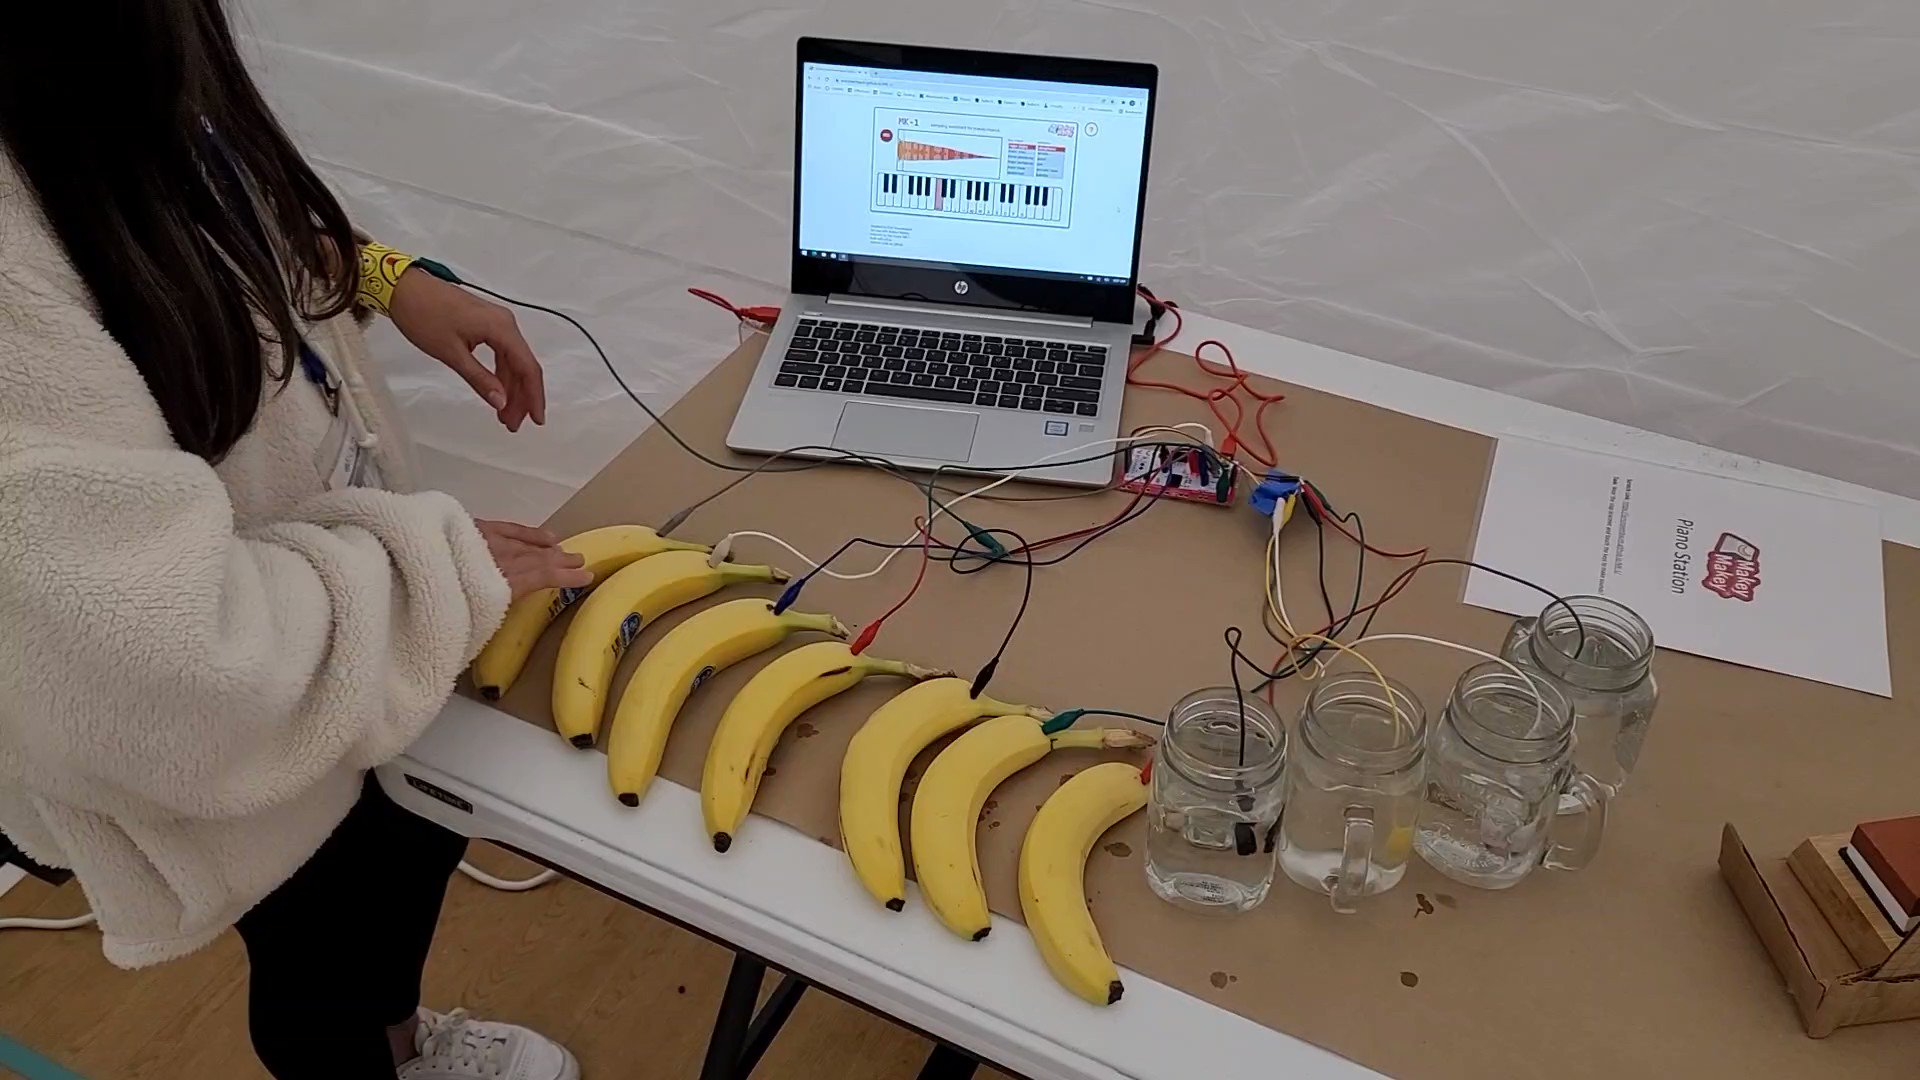 Jacob Radcliffe on Twitter: "Awesome demo of the banana piano! @makeymakey  https://t.co/U685JNmRrp" / Twitter